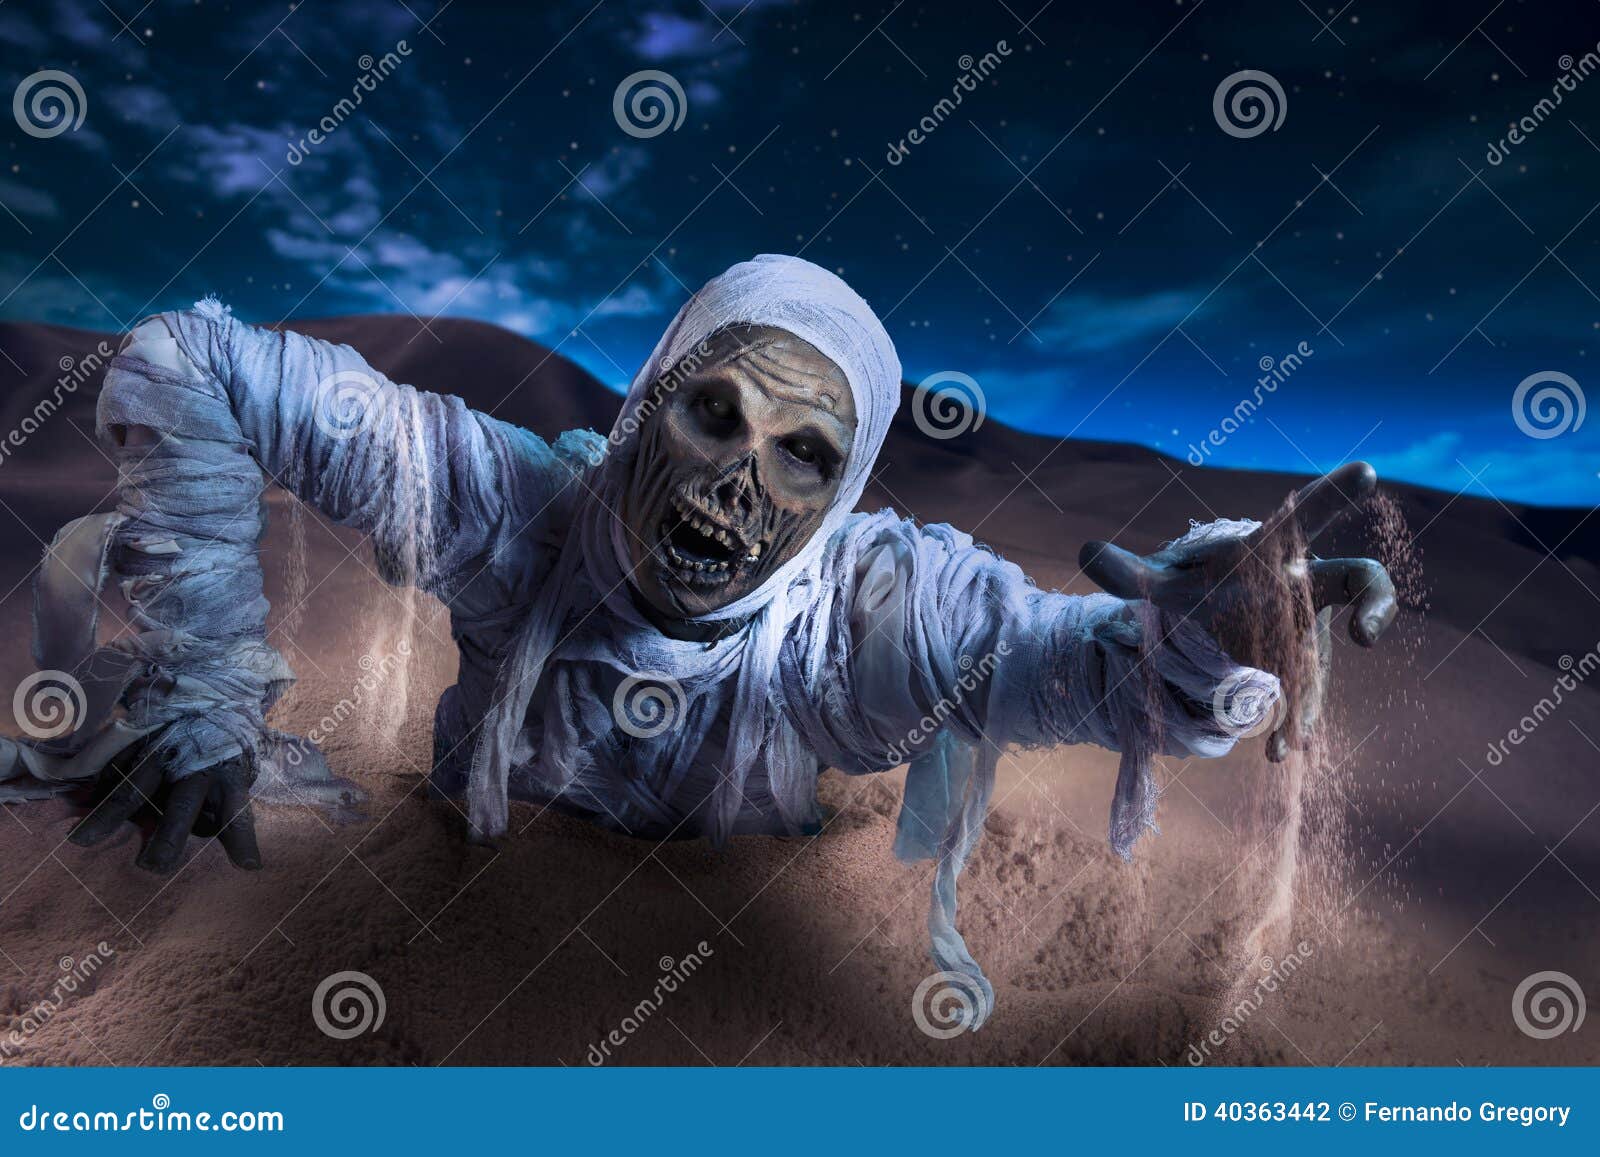 scary mummy in a desert at night